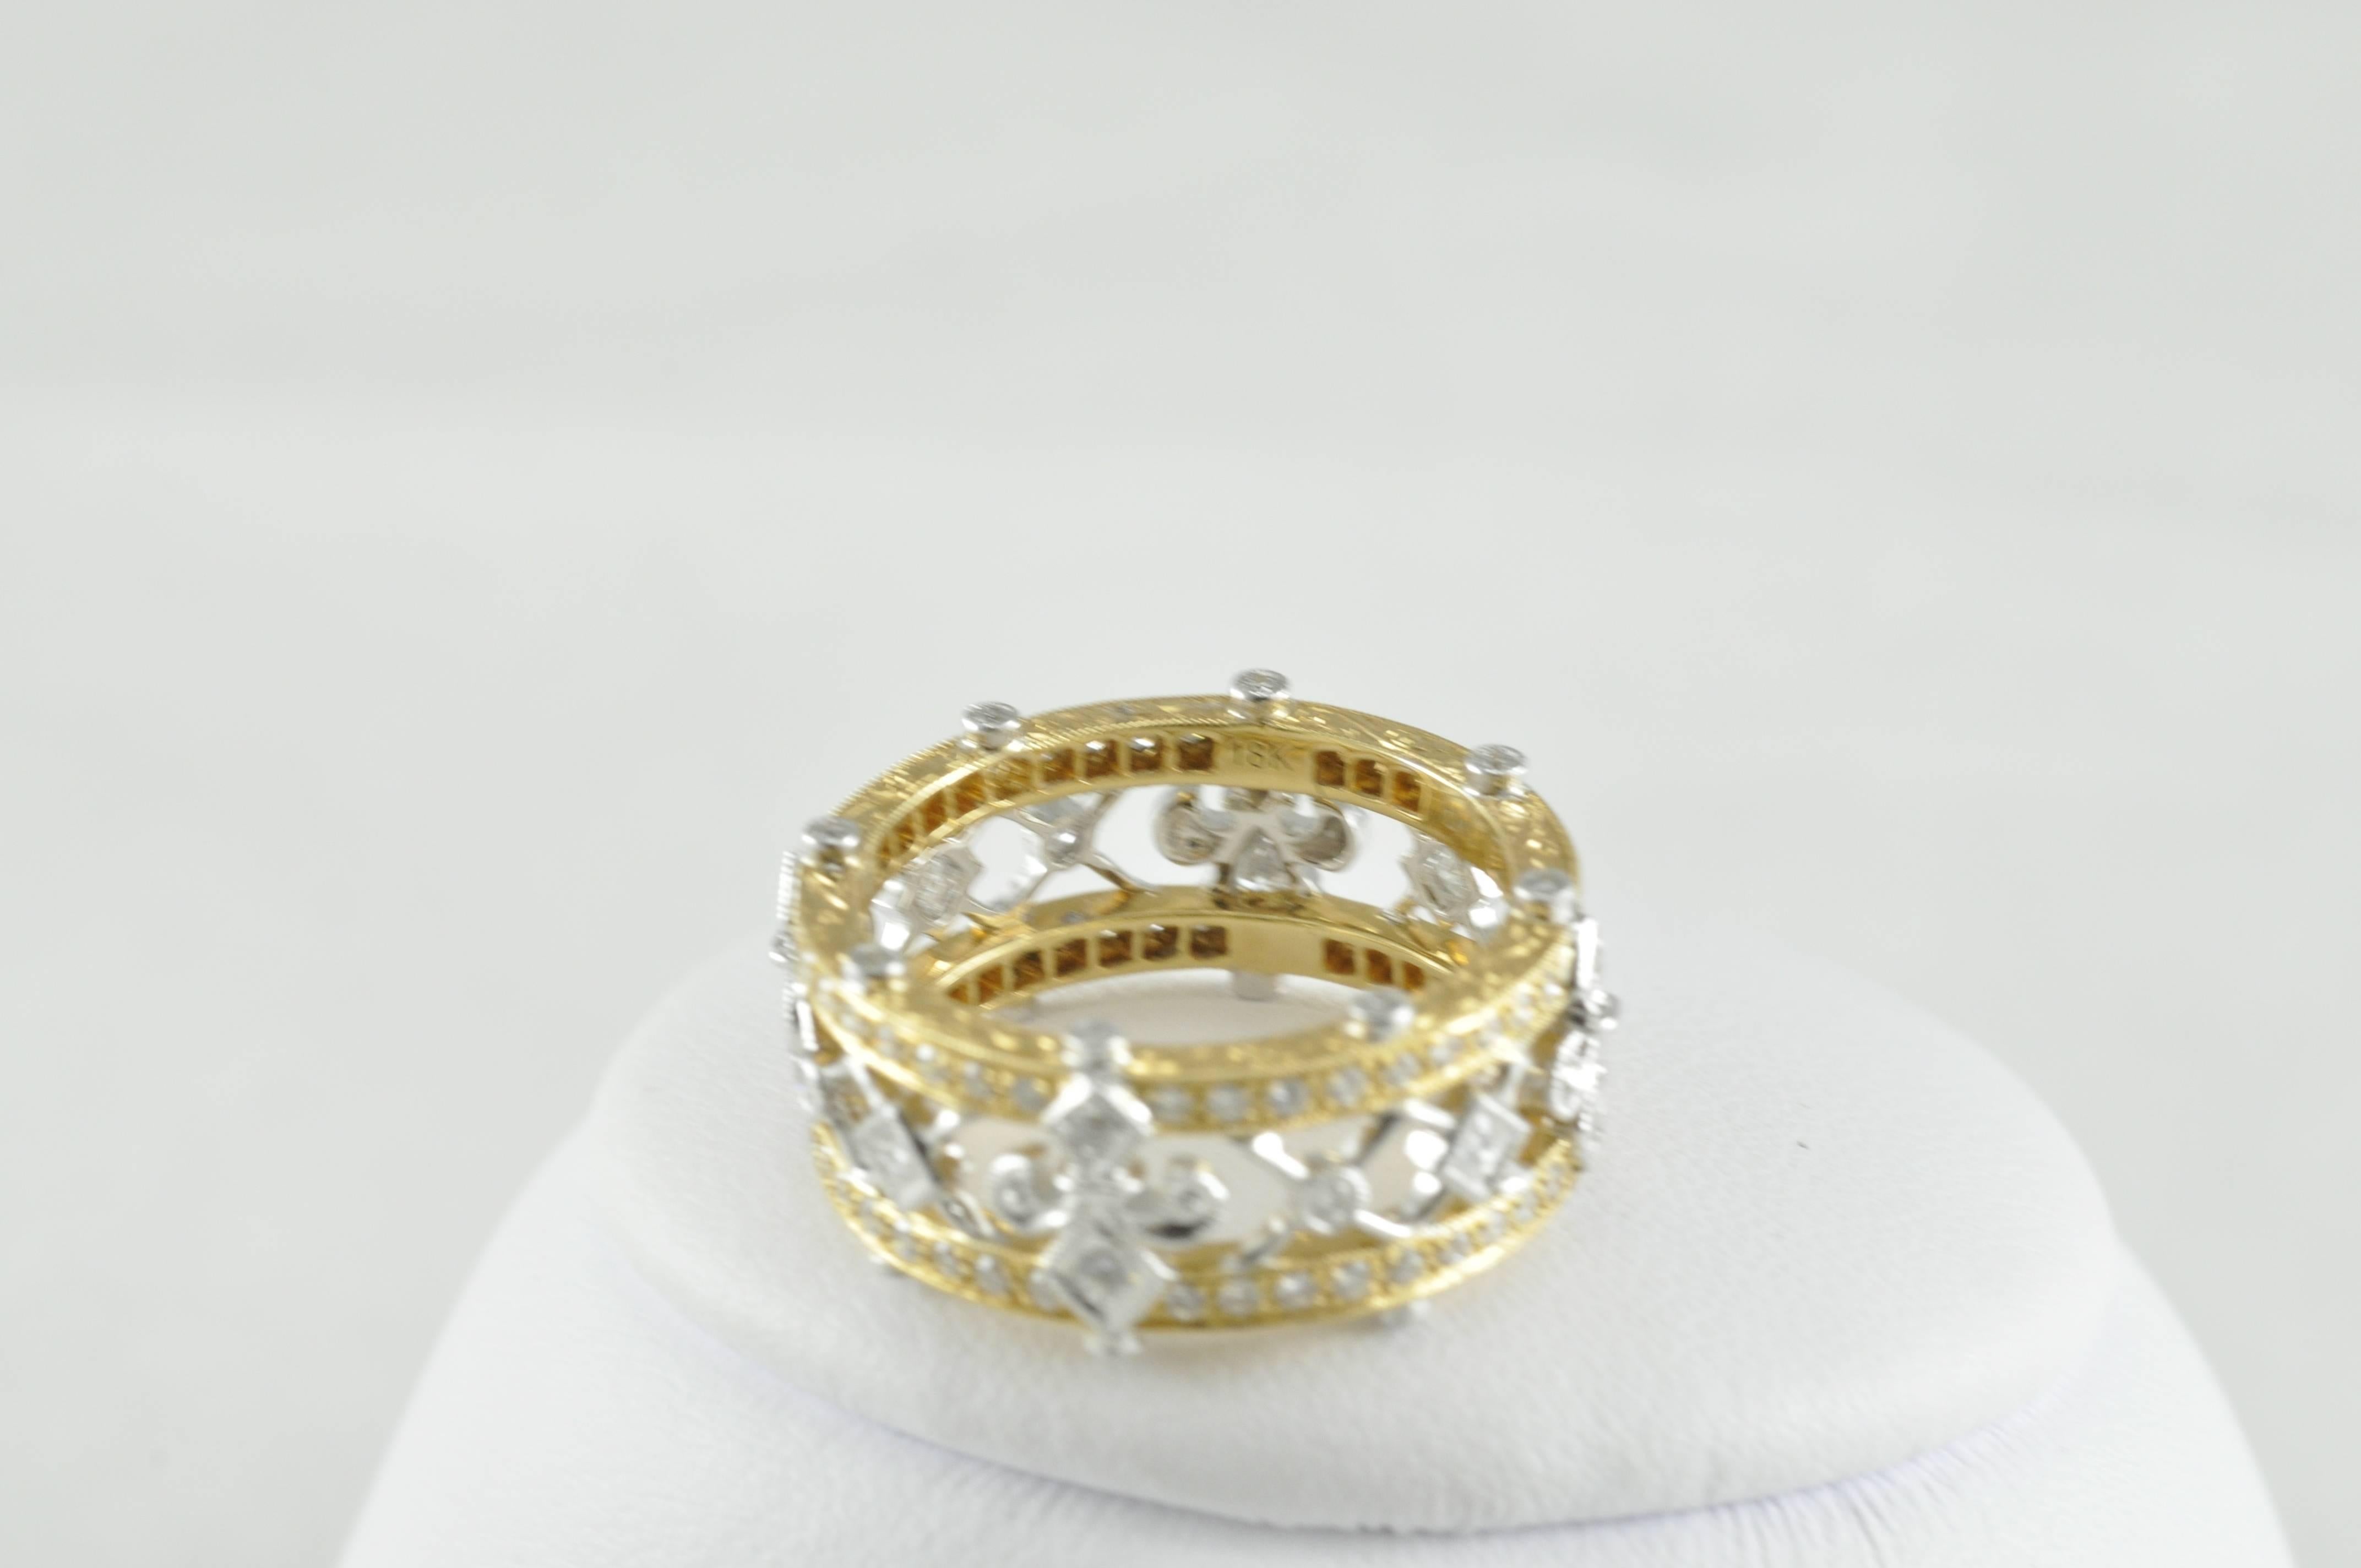 18k White and Yellow Gold from Award Winning Designer Beverly K.  This ring has .79CTW Diamonds.  Current Size is 7.  The ring is stamped bkc, 18K and BK